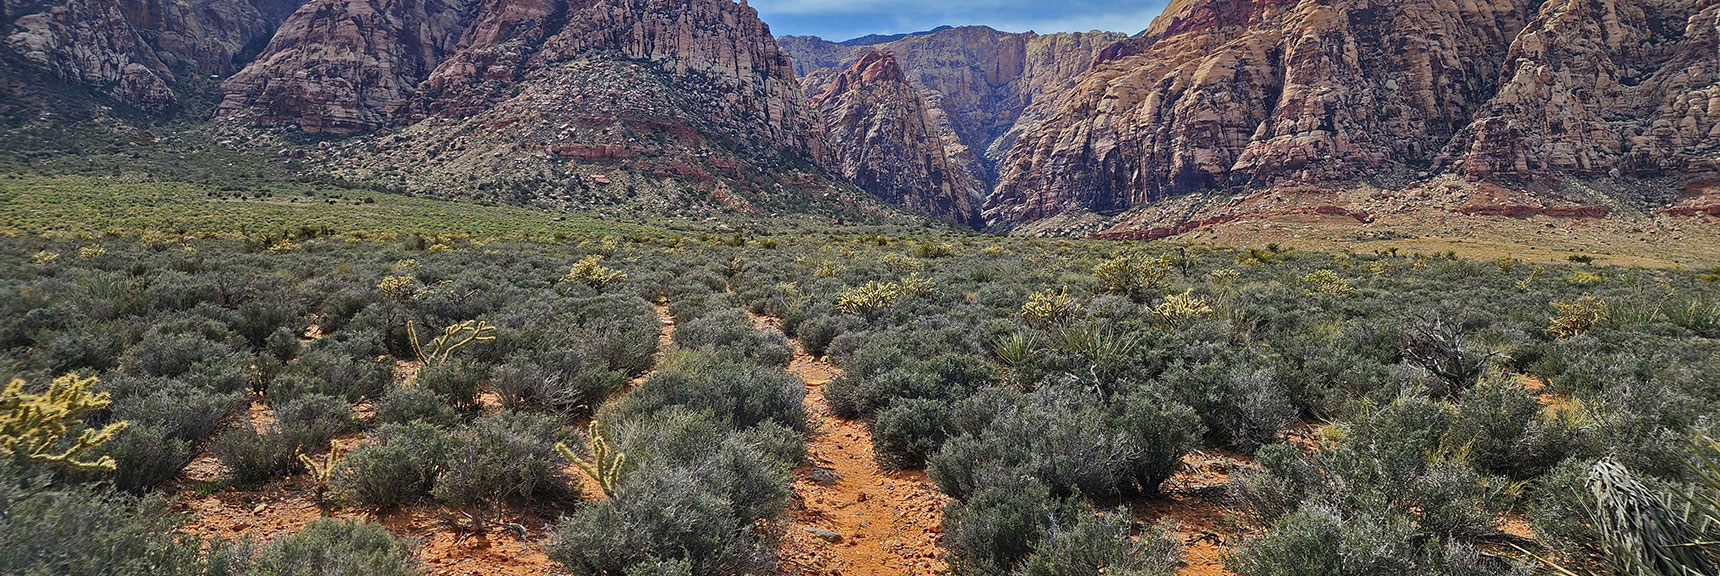 Historic Road Continuing Beyond Cairn Clearly Aimed at Pine Creek Canyon | Historic Roads in Red Rock Canyon, Nevada | David Smith | LasVegasAreaTrails.com